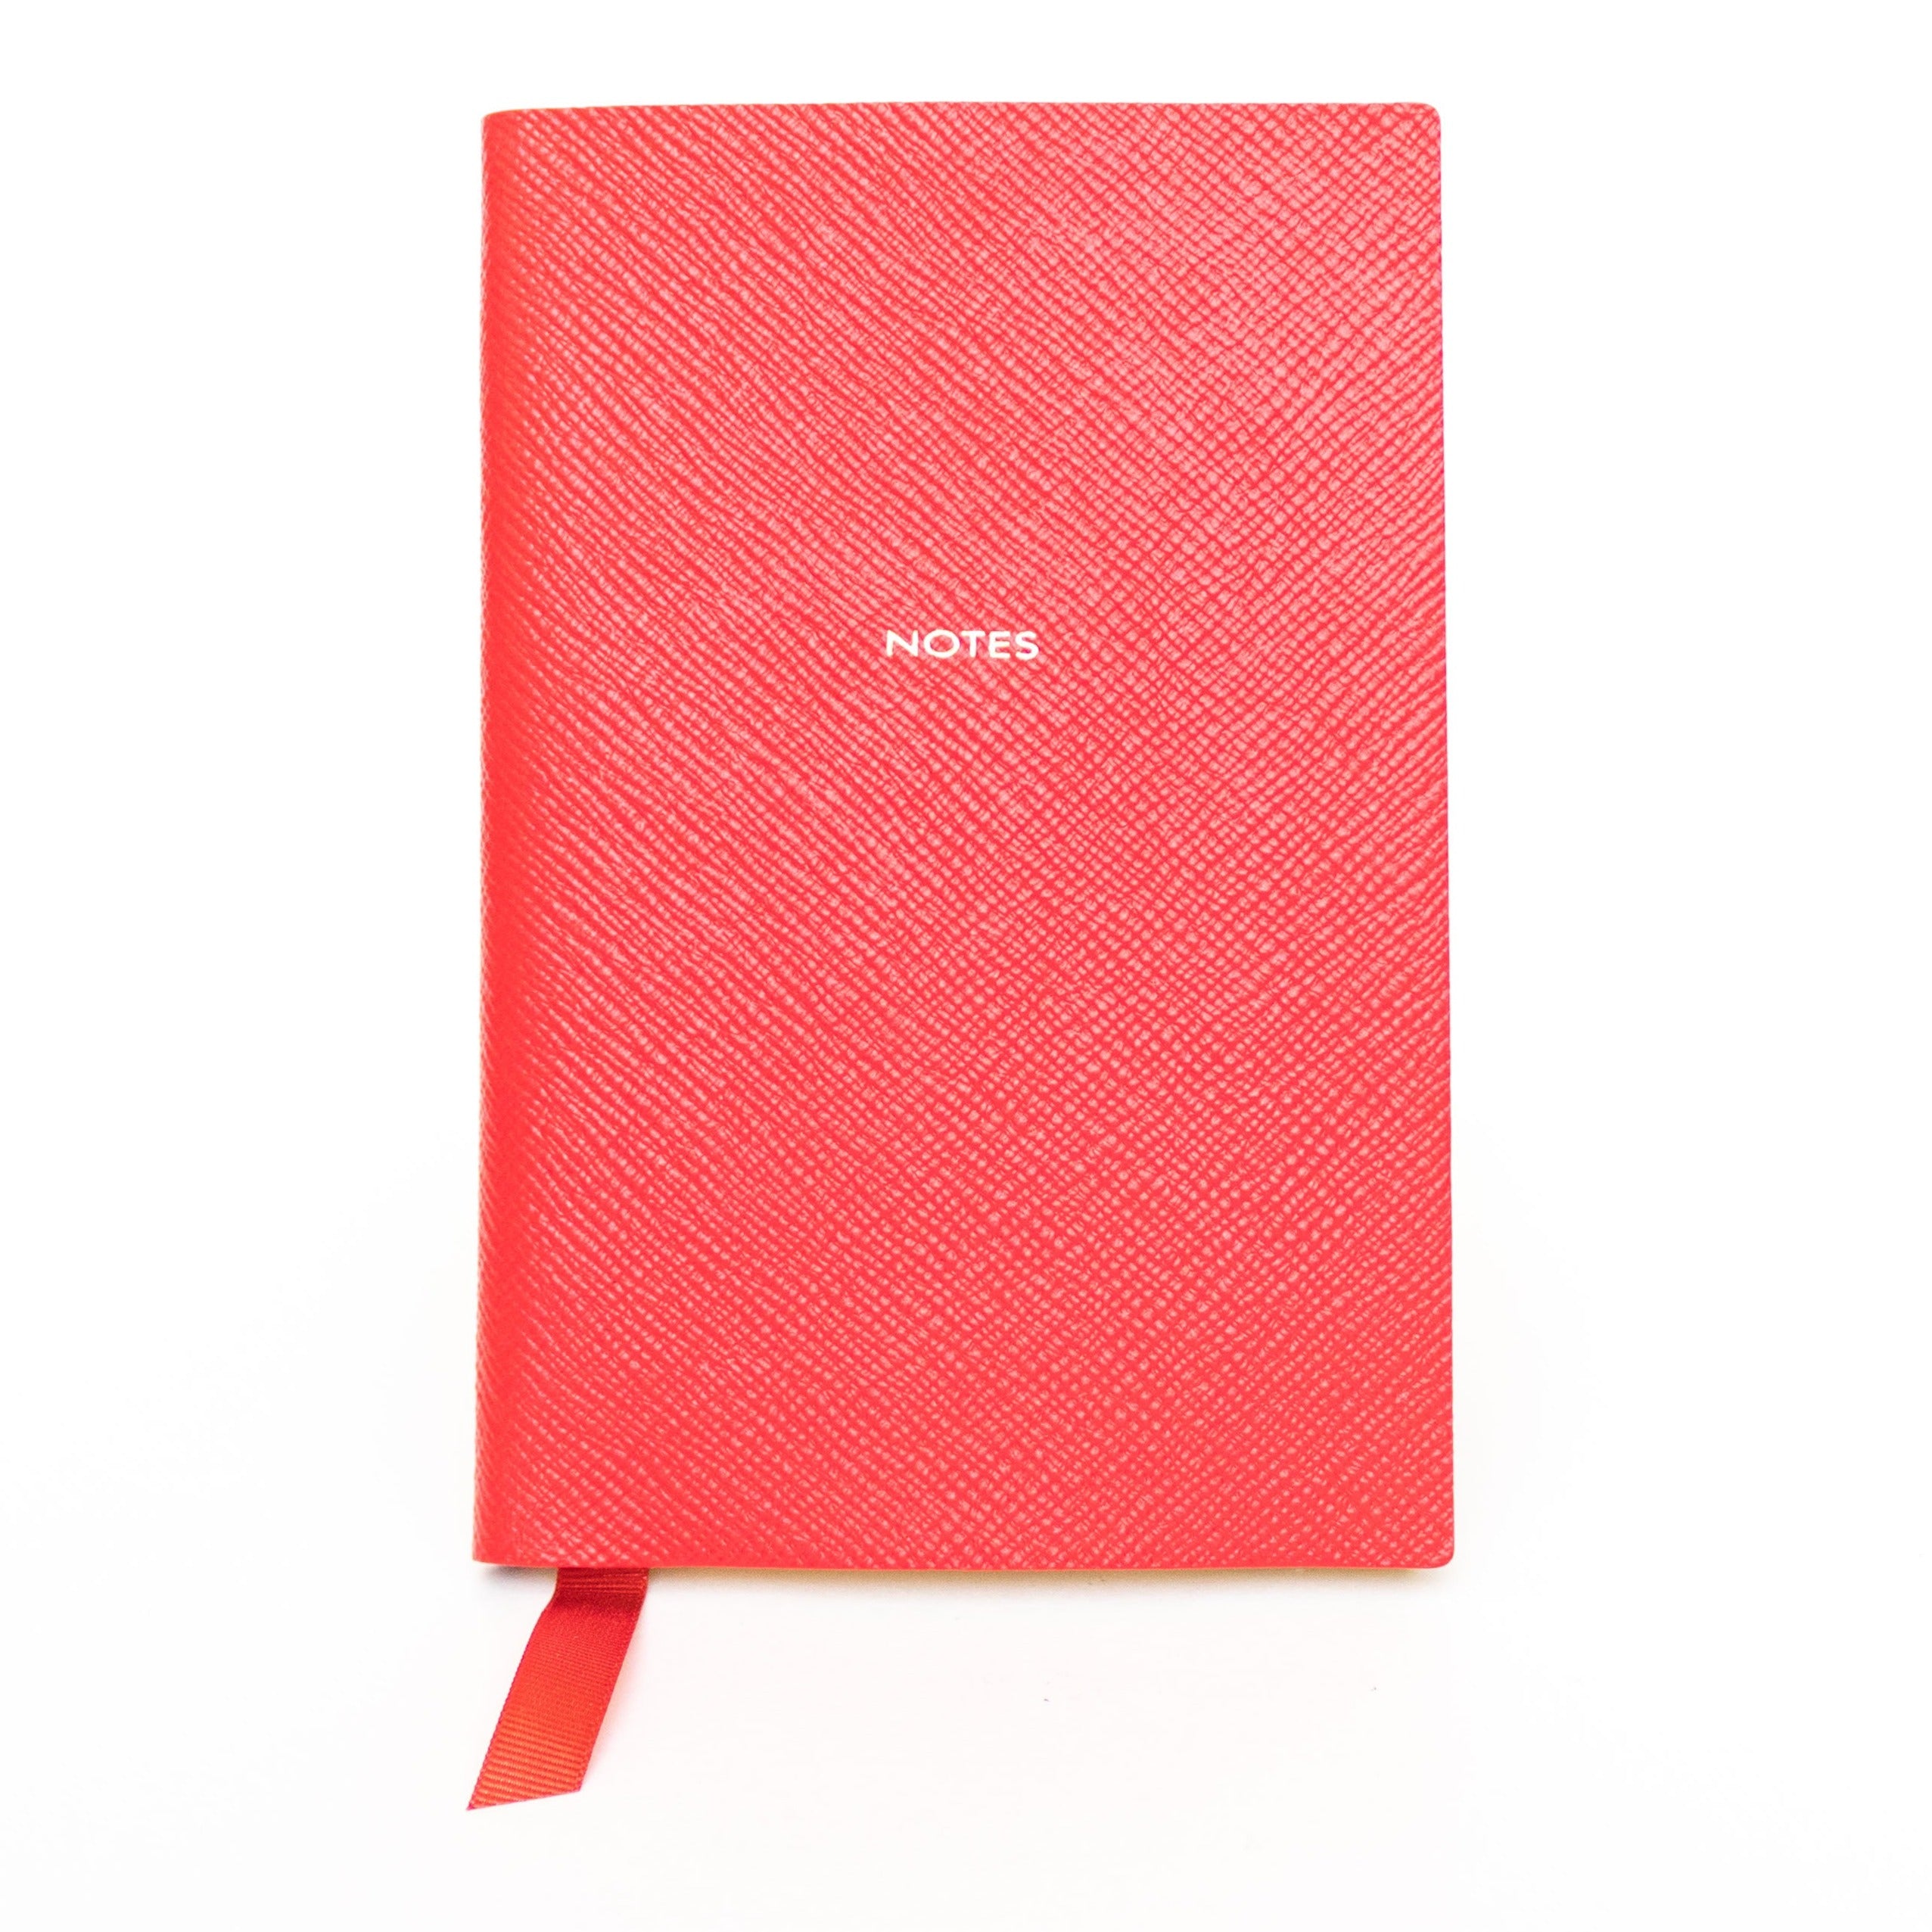 Smythson Chelsea Notebook Notes Red - Decree Co. 